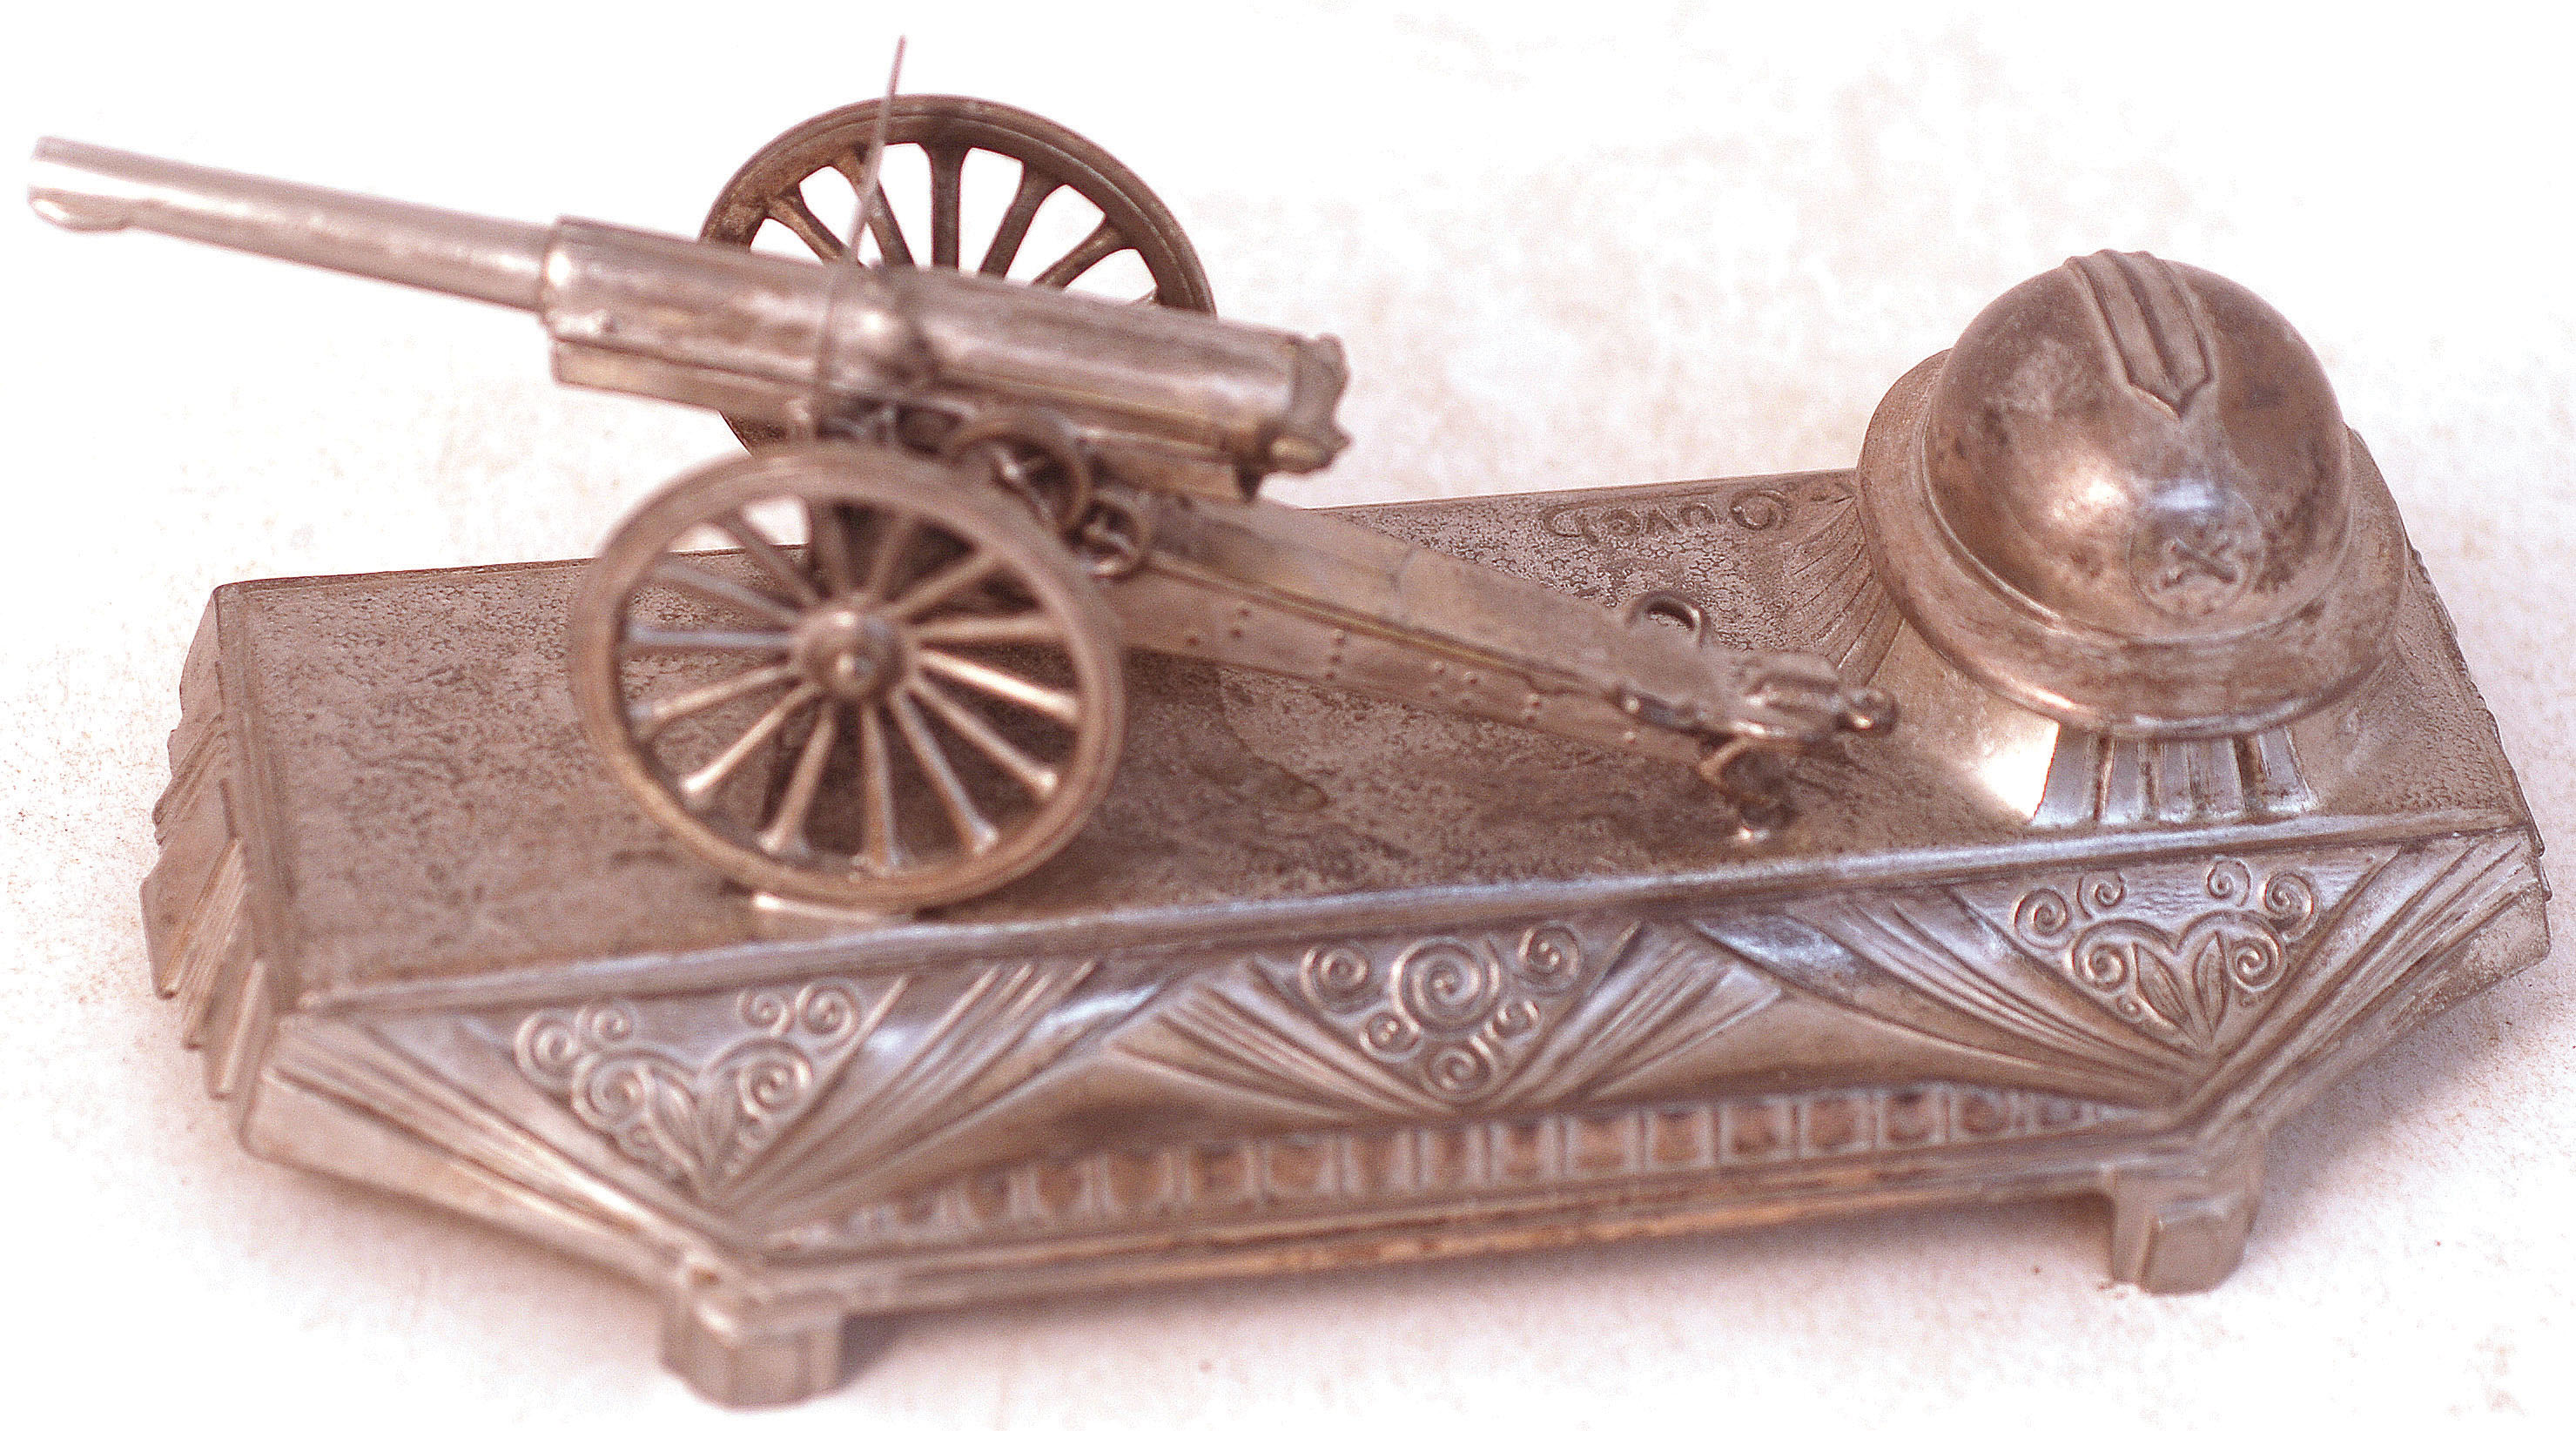 MILATARY INKSTAND. 2.25ins tall, 6.25ins long, white metal with cannon & soldiers helmet which lifts